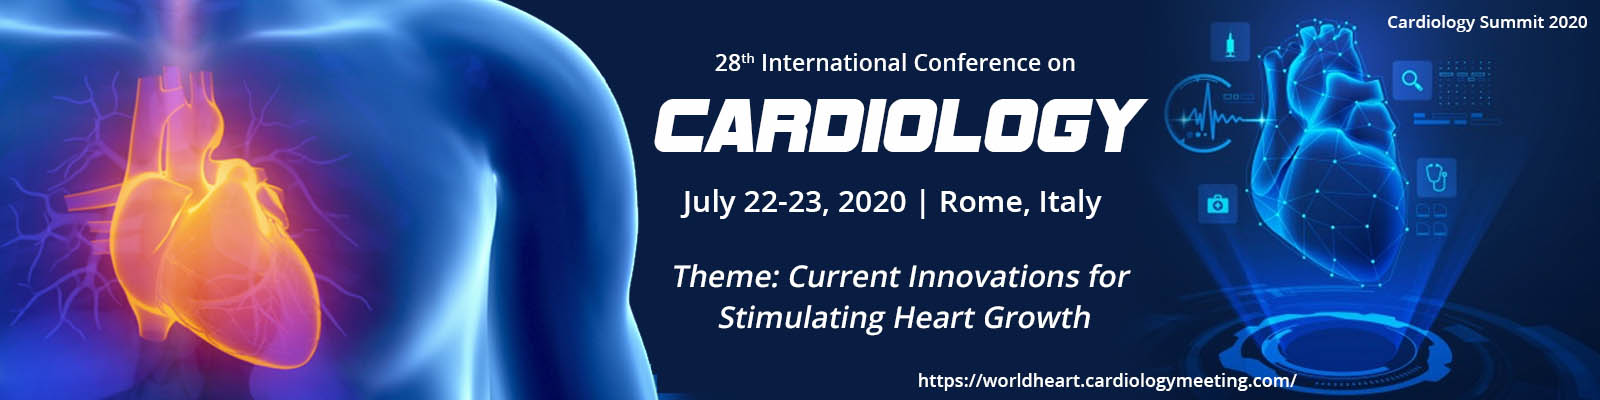 28th International Conference on Cardiology, Rome, Italy